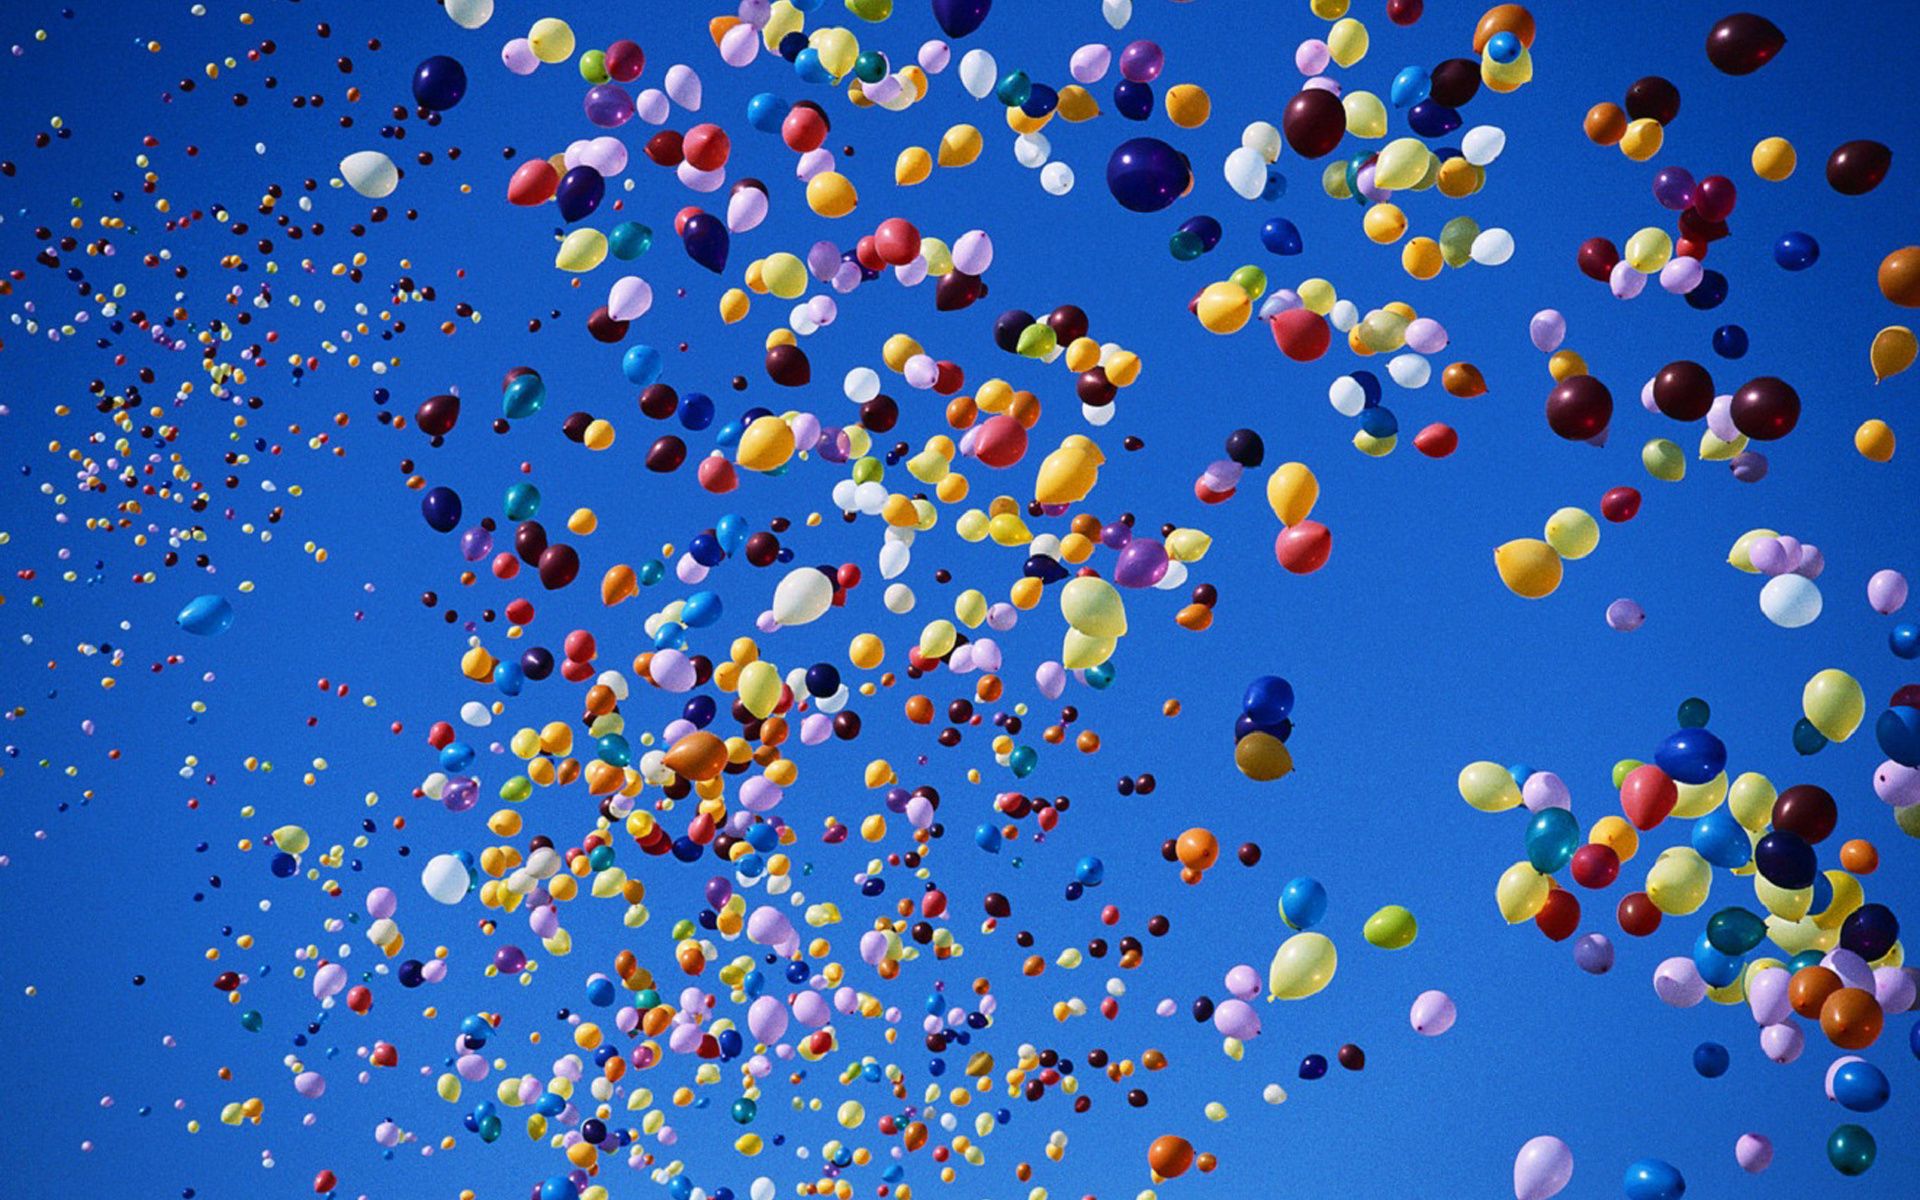 38 Balloon HD Wallpapers | Backgrounds - Wallpaper Abyss